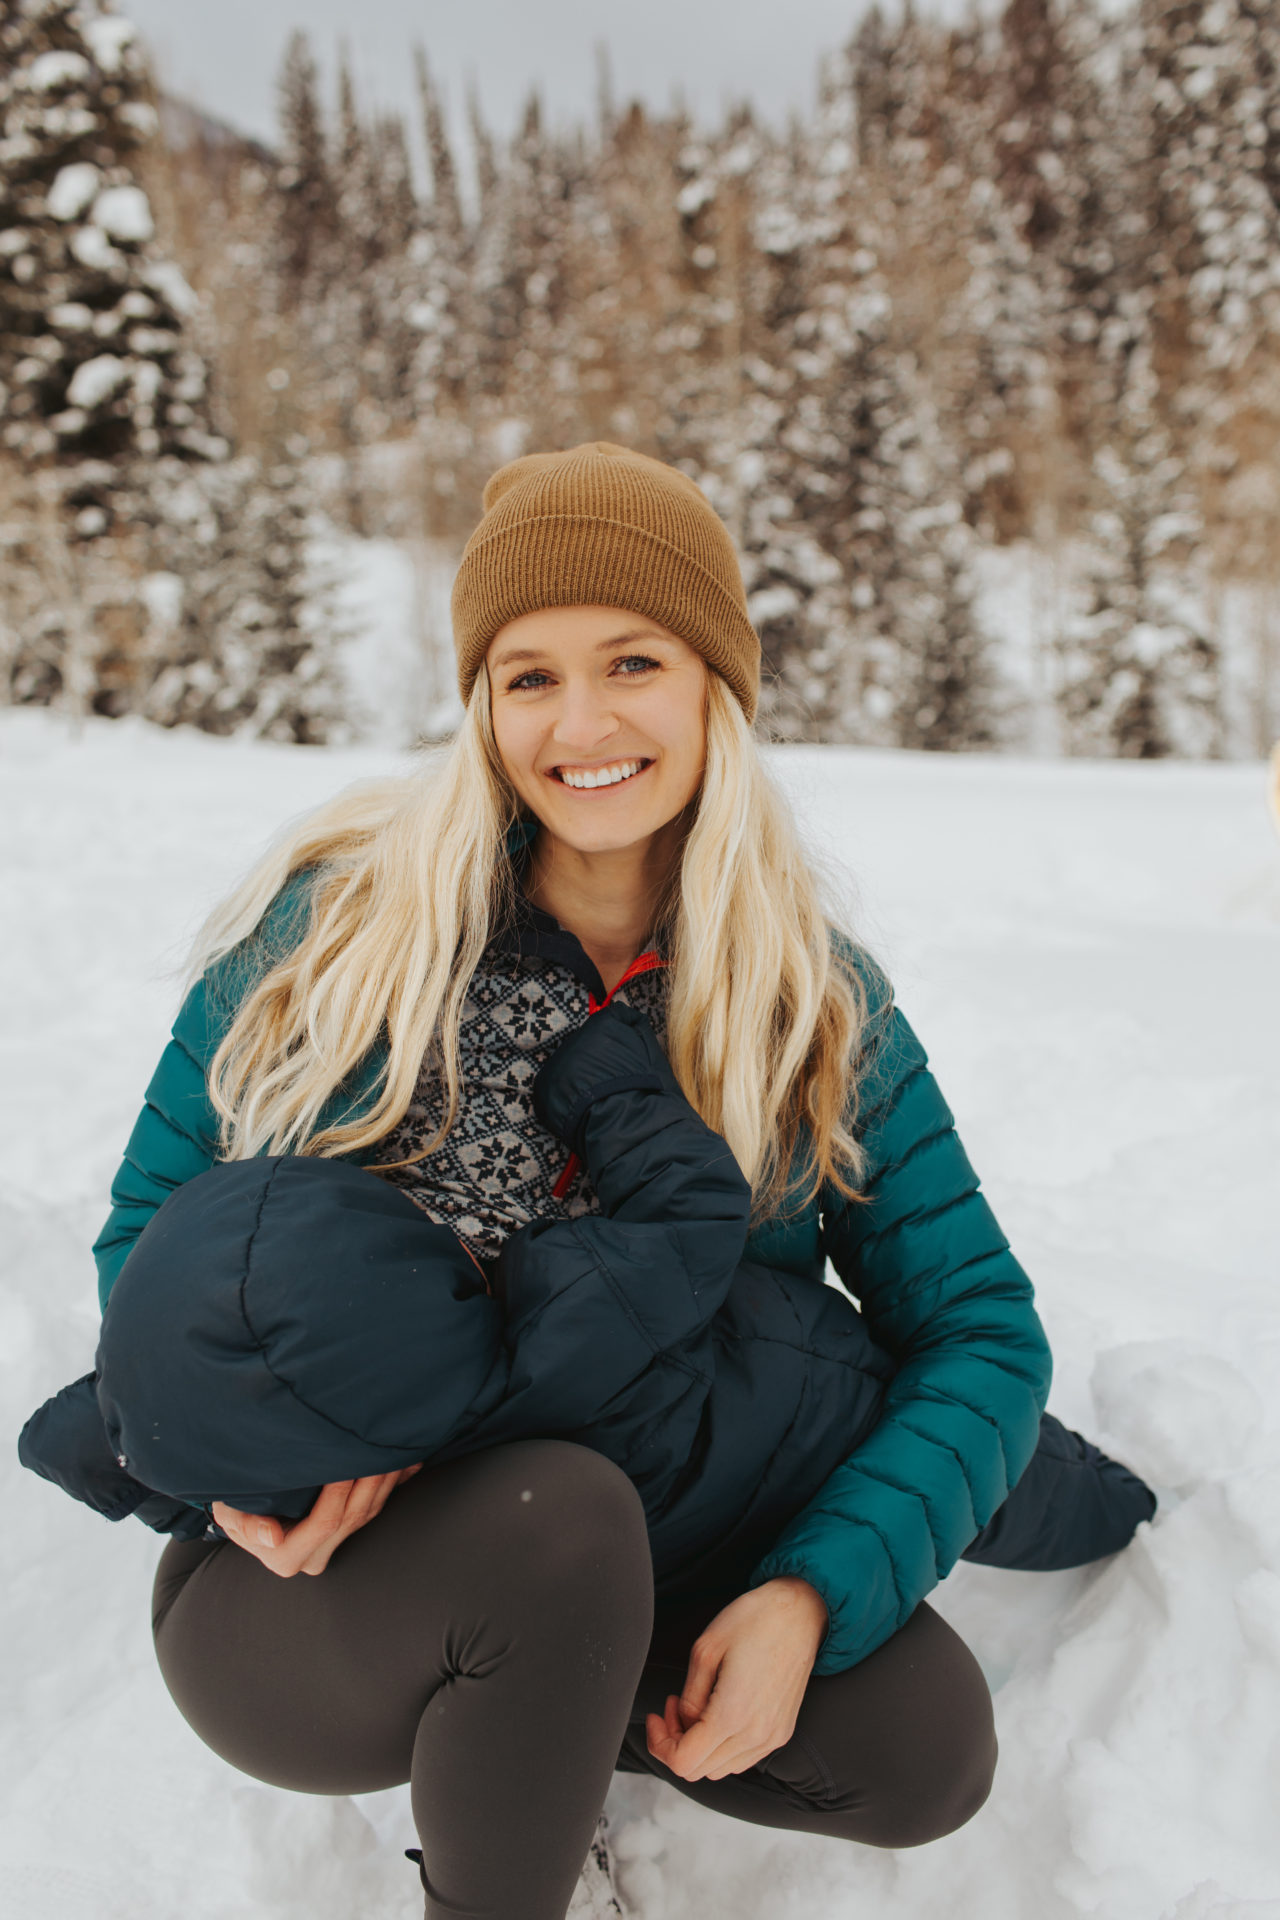 How to Breastfeed While Hiking in the Winter - Hailey Outside